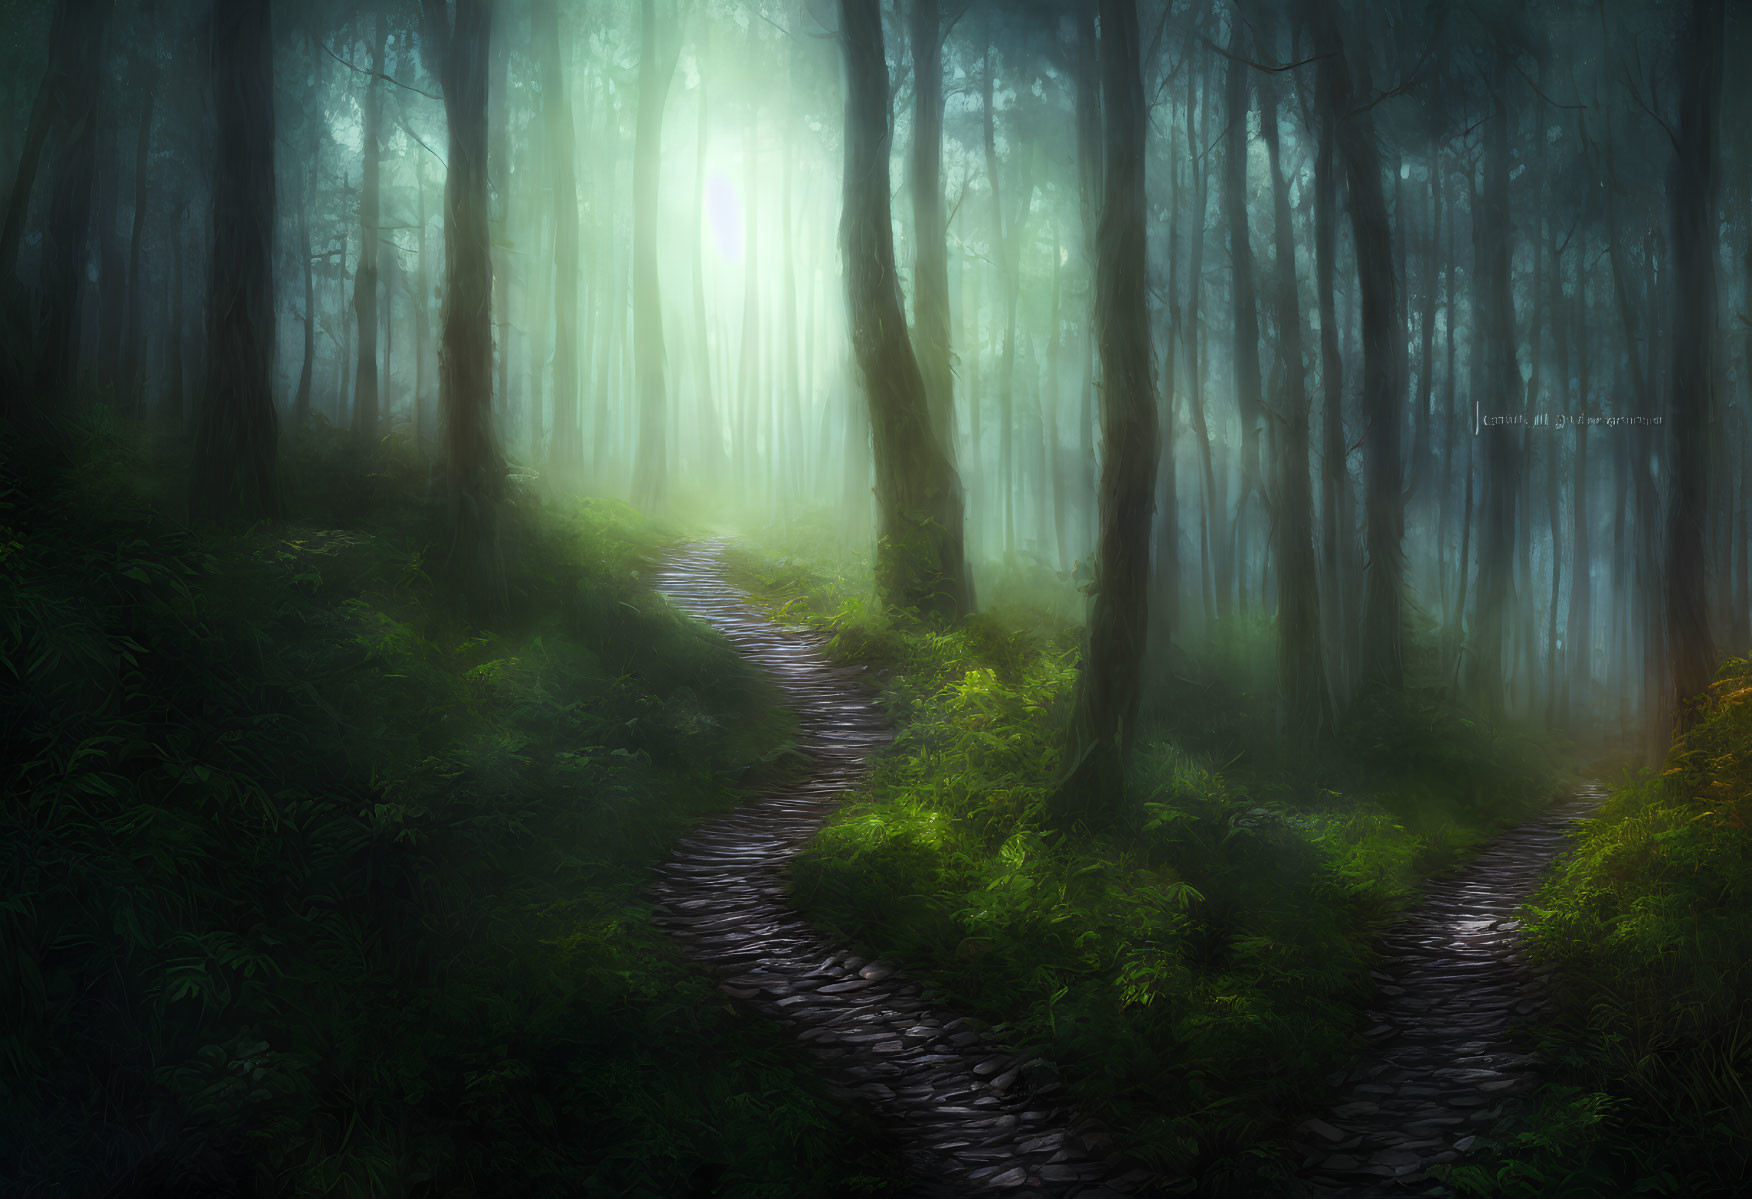 Misty sunlit forest with winding cobblestone path